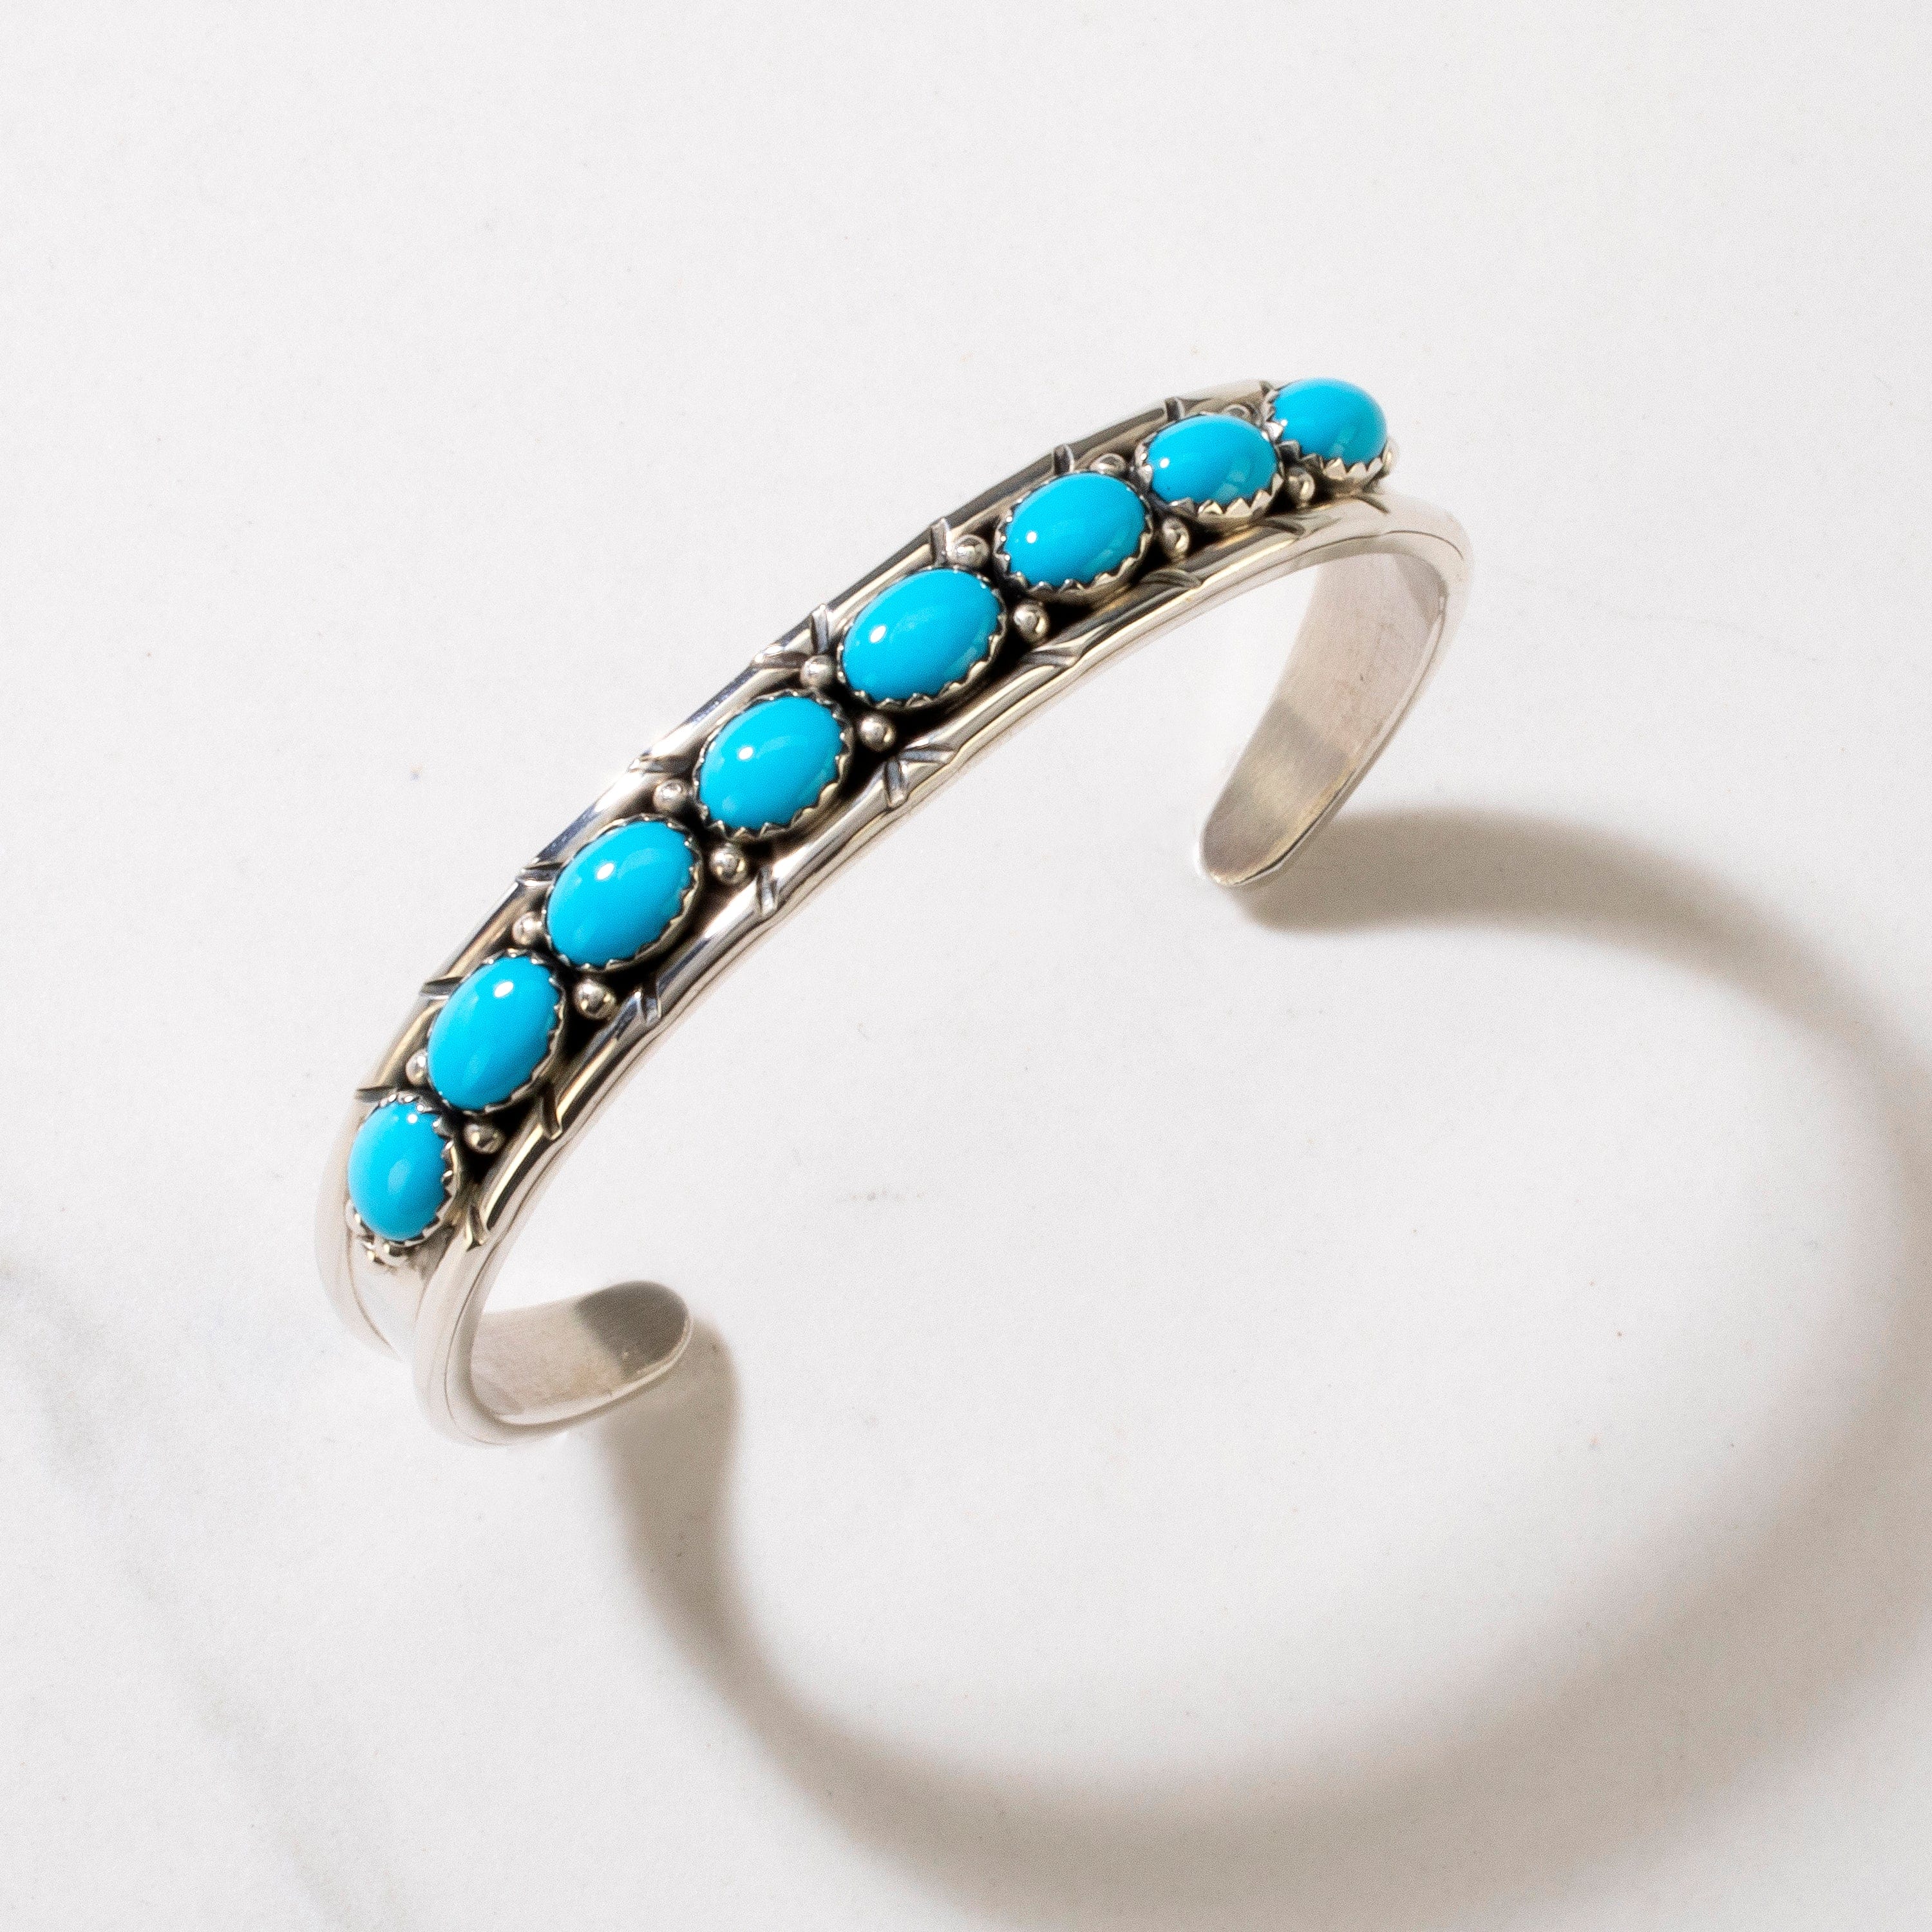 Kalifano Native American Jewelry Russell Sam Navajo Sleeping Beauty Turquoise USA Native American Made 925 Sterling Silver Cuff NAB1200.025